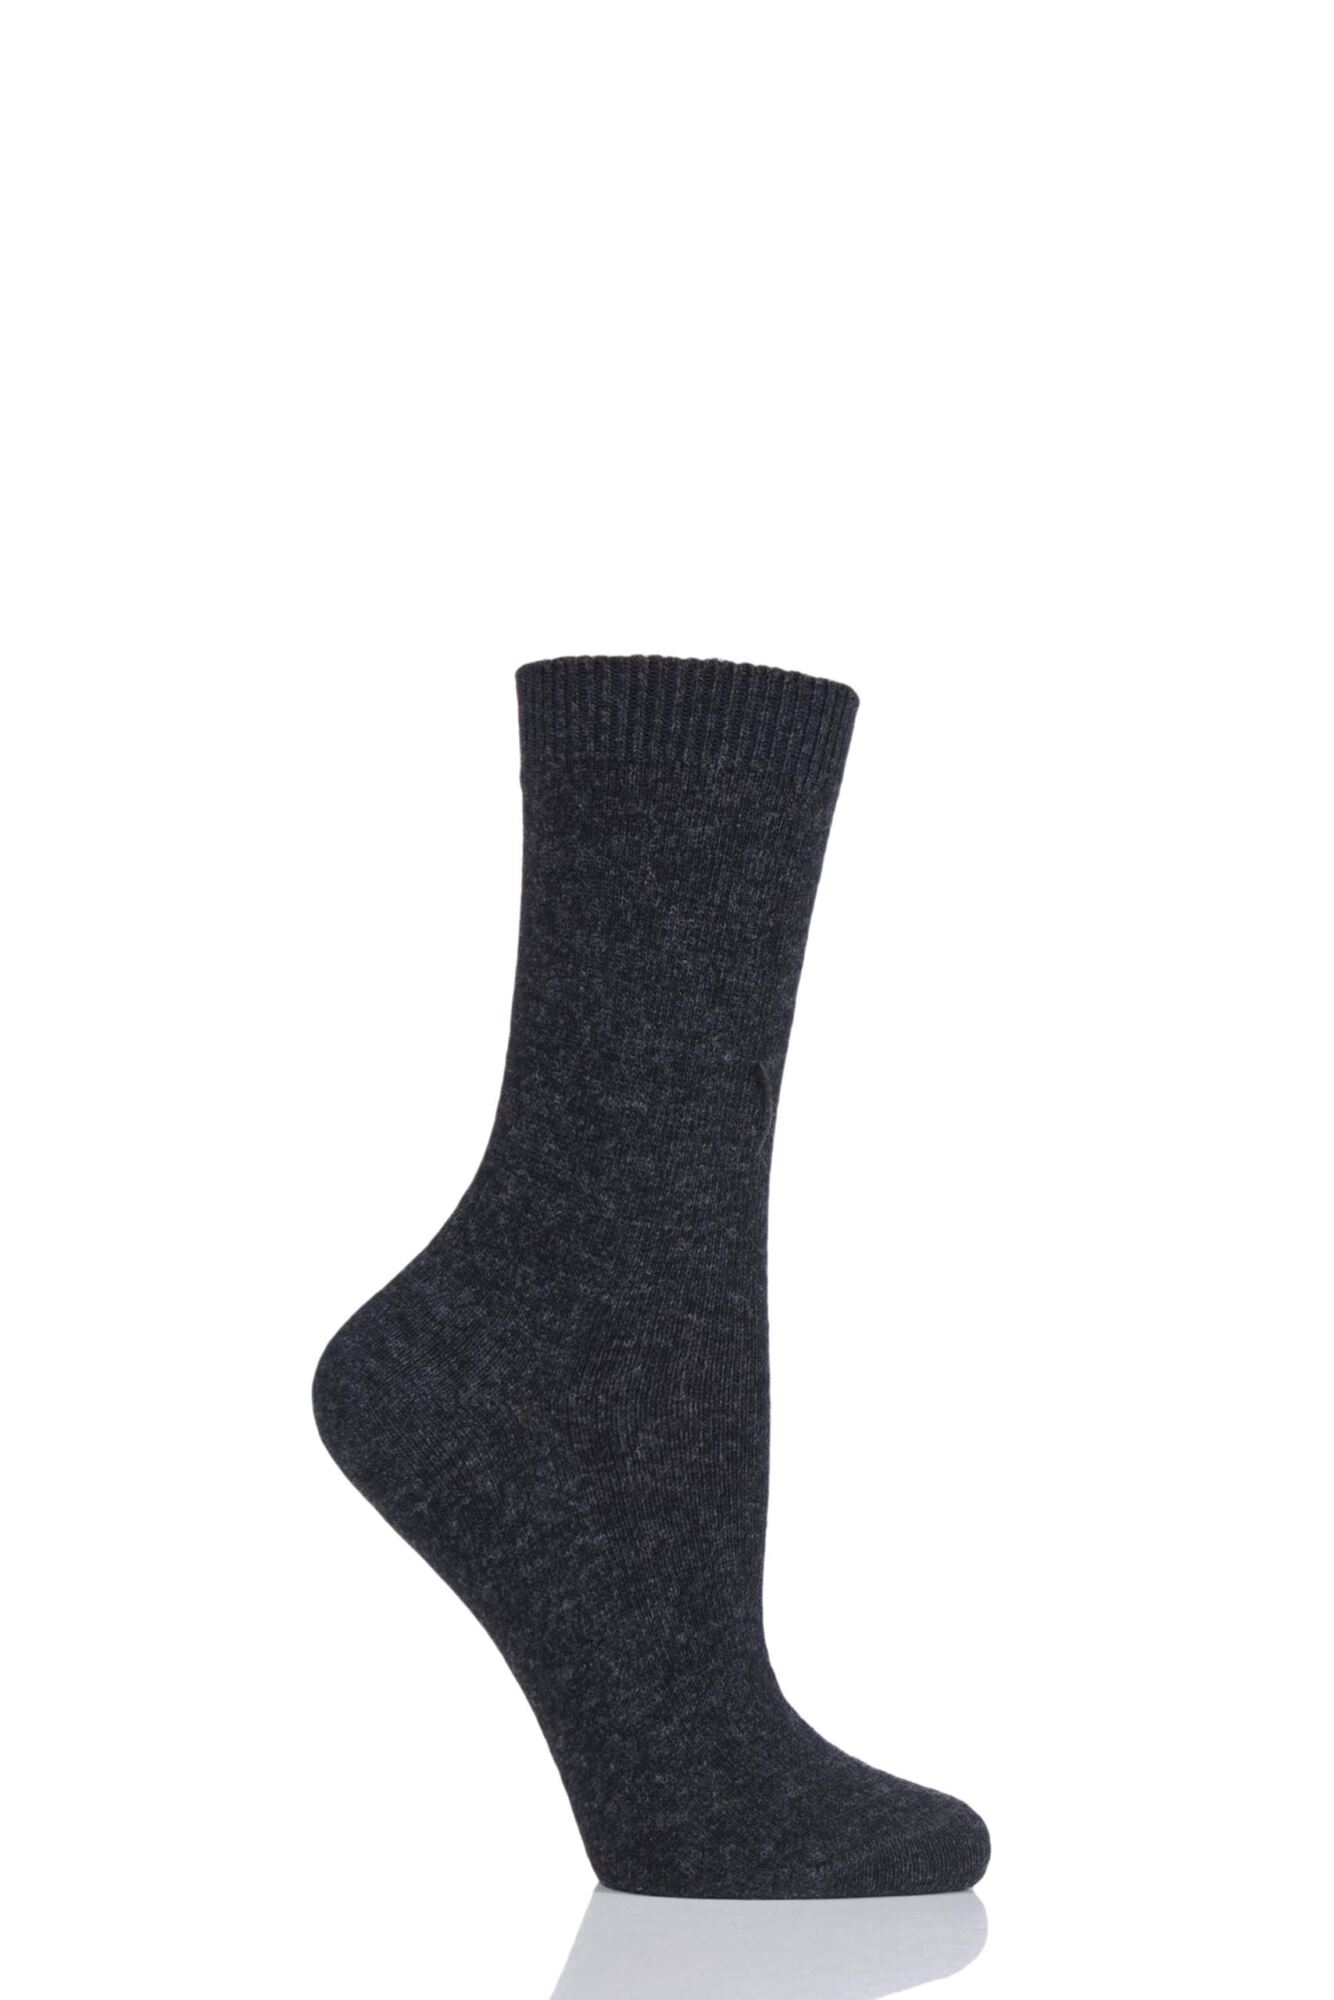 Ladies Falke Cosy Wool and Cashmere Socks from SOCKSHOP